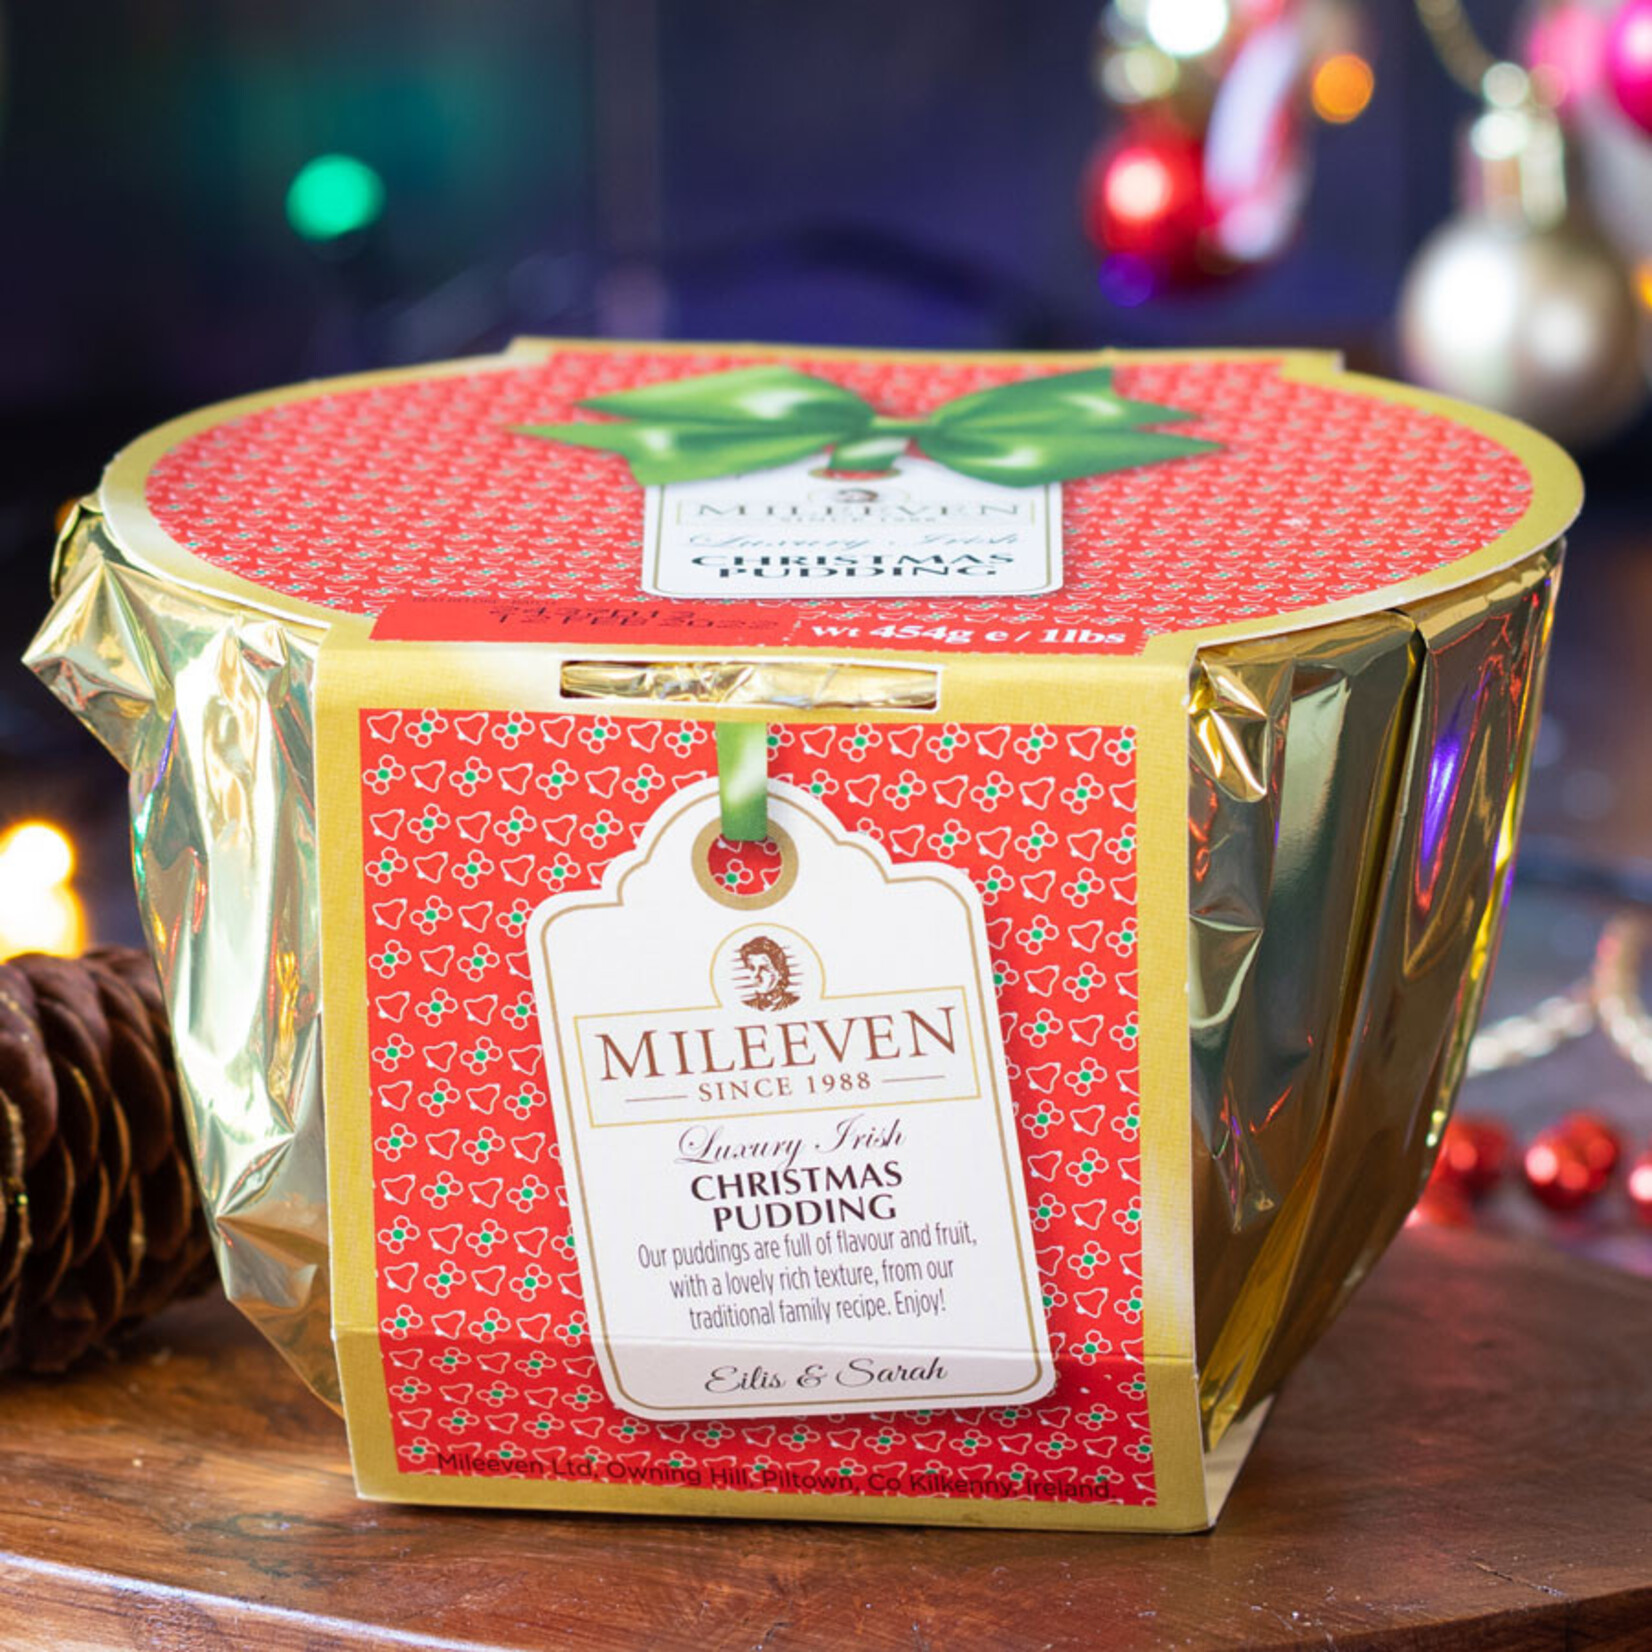 Mileeven Mileeven Luxury Christmas Pudding 900g (31.7oz)